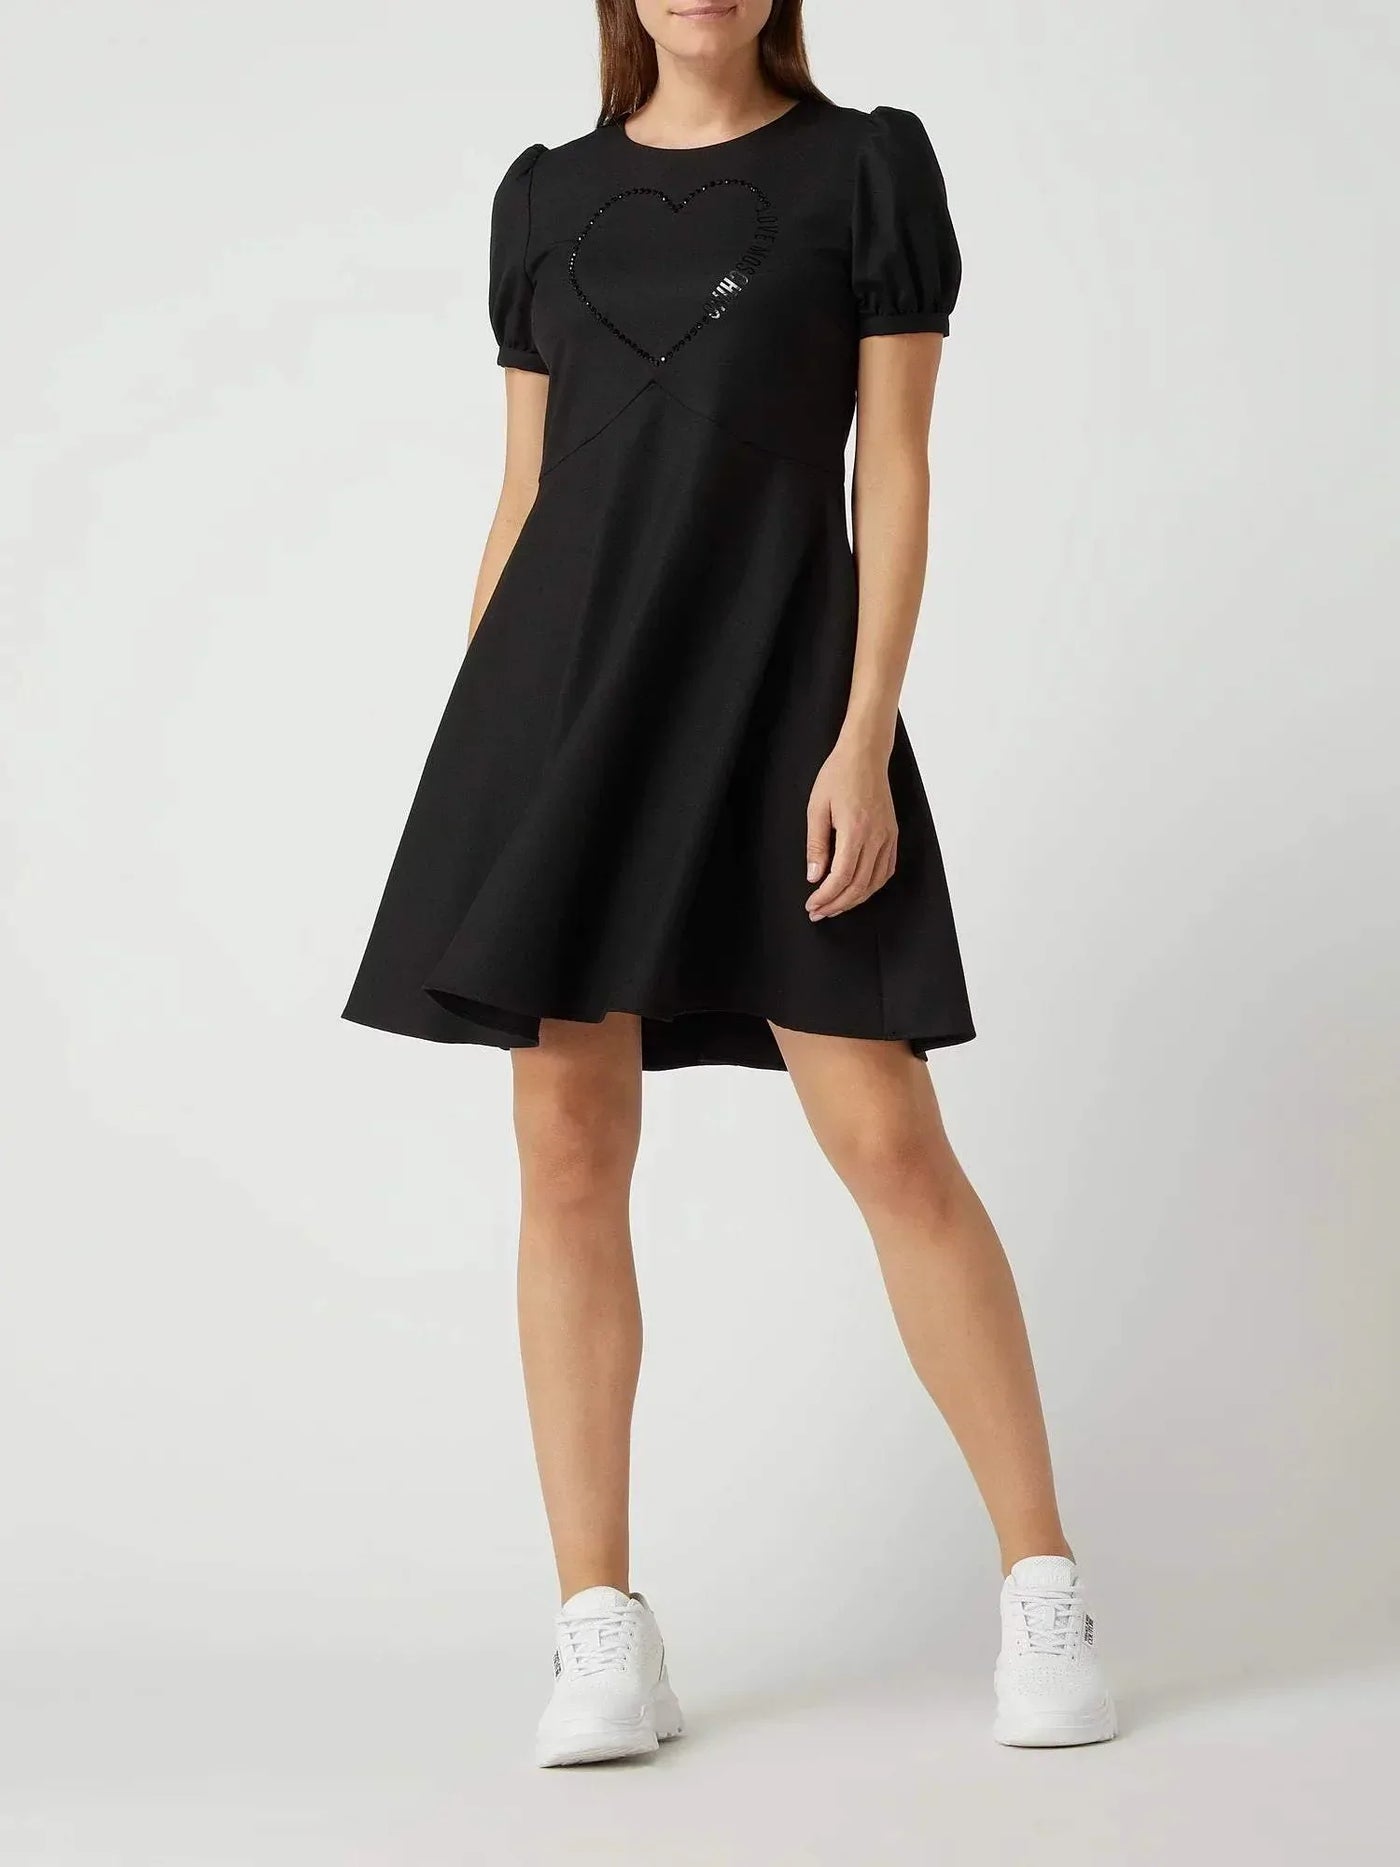 Love Moschino shor sleeve zip closure  Dress Black, Dresses - Women - Clothing, feed-agegroup-adult, feed-color-Black, feed-gender-female, IT38|XS, IT40|S, IT42|M, IT44|L, IT46 | L, IT48 | XL, Love Moschino at SEYMAYKA